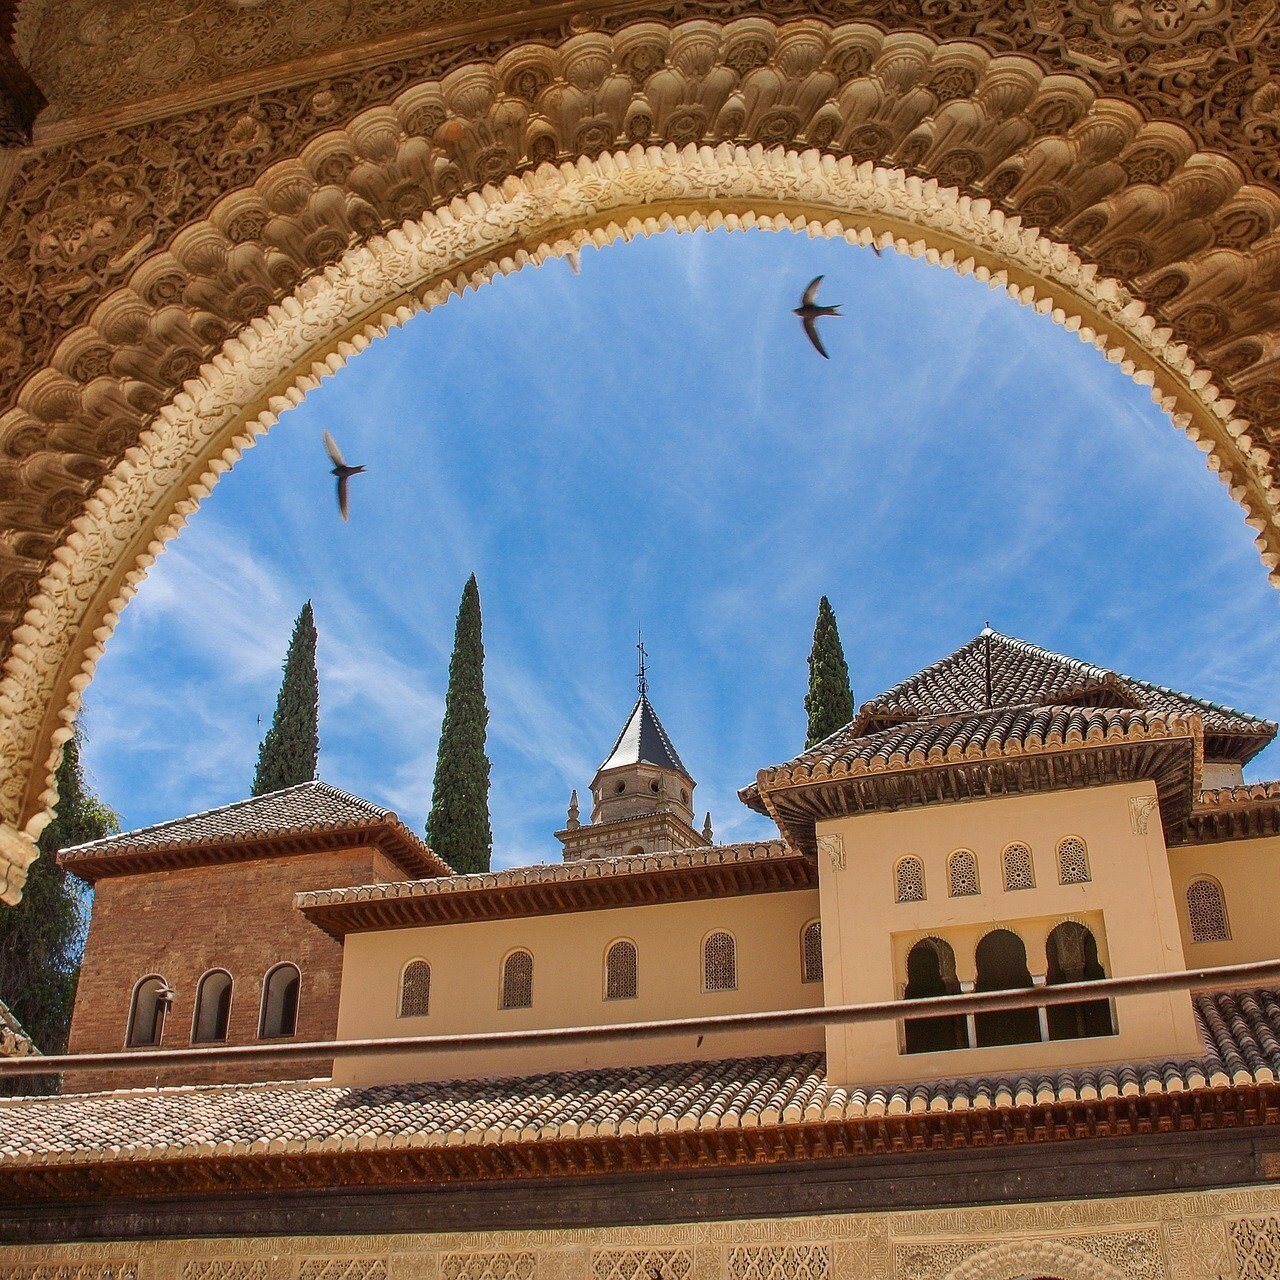 View+from+the+Alhambra+in+Granada.jpg